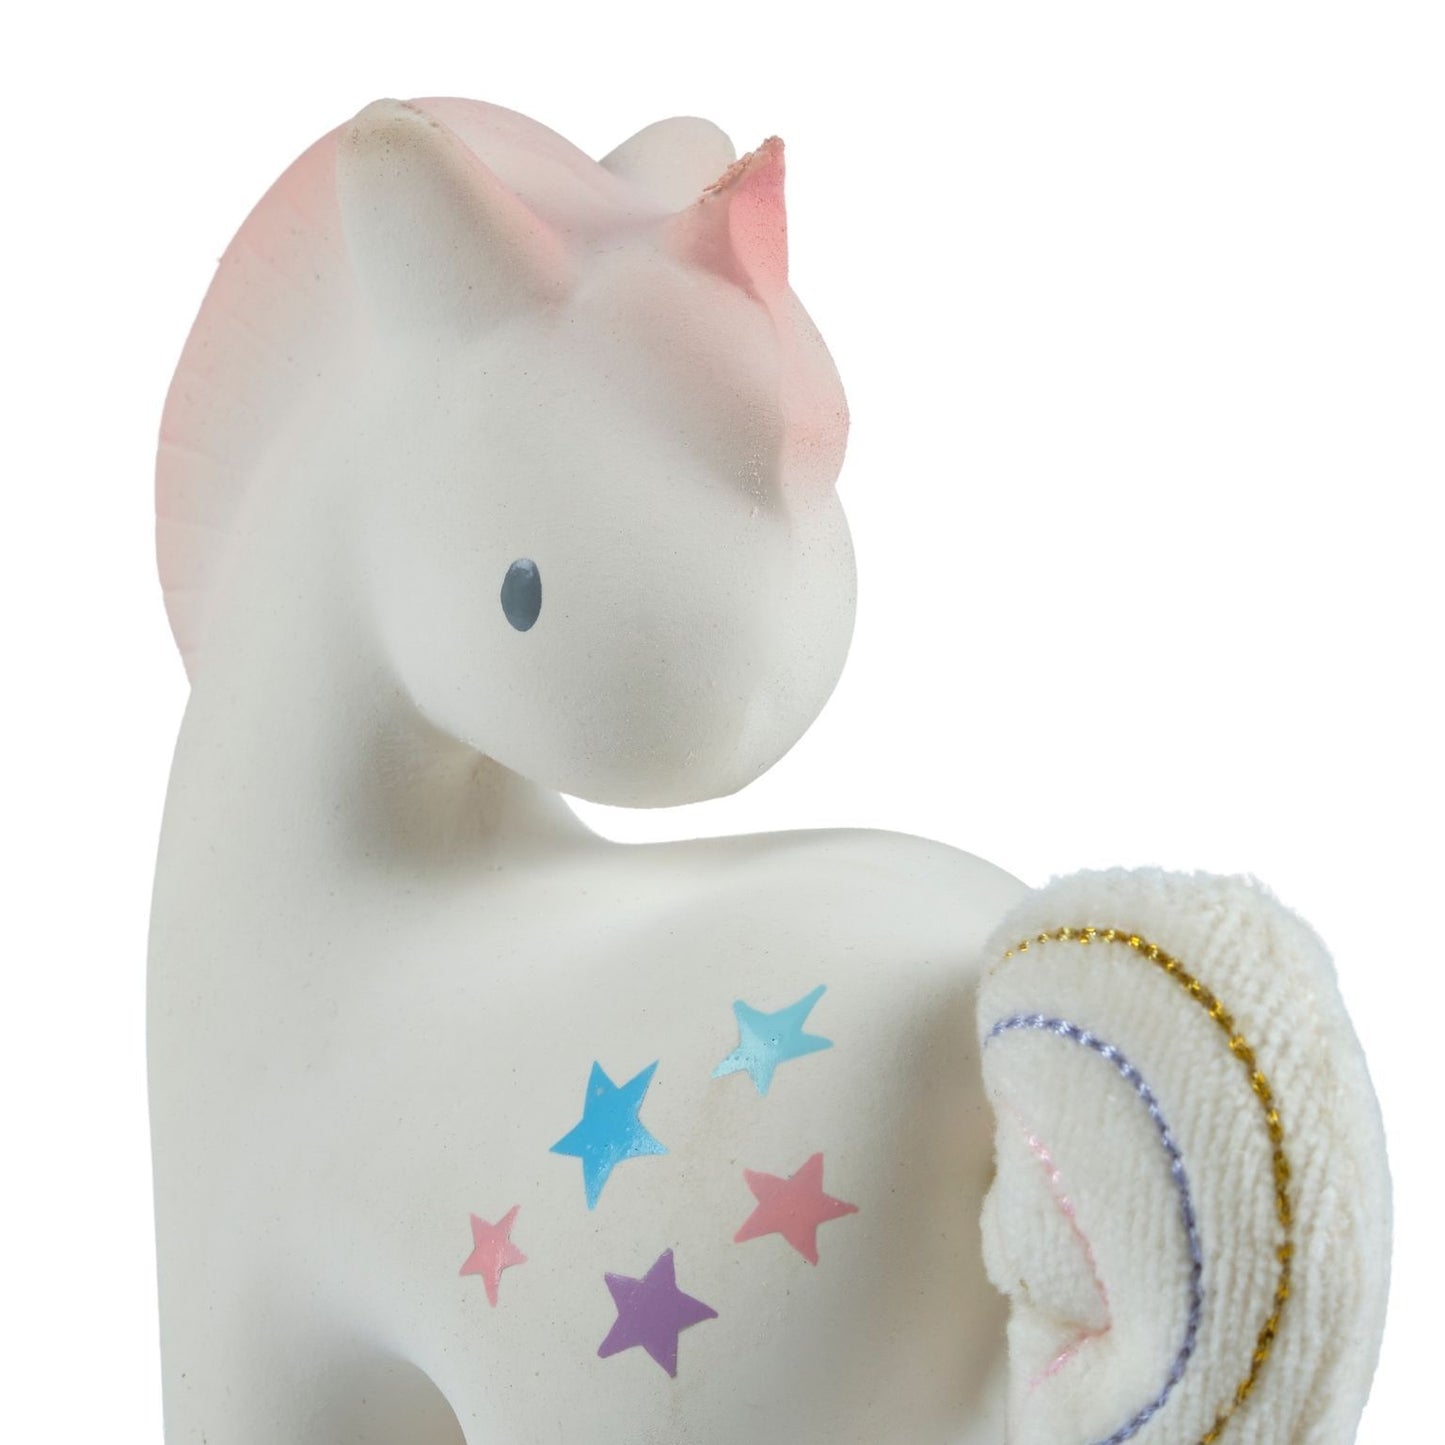 Cotton Candy Unicorn Rubber Teether & Rattle - Little Reef and Friends